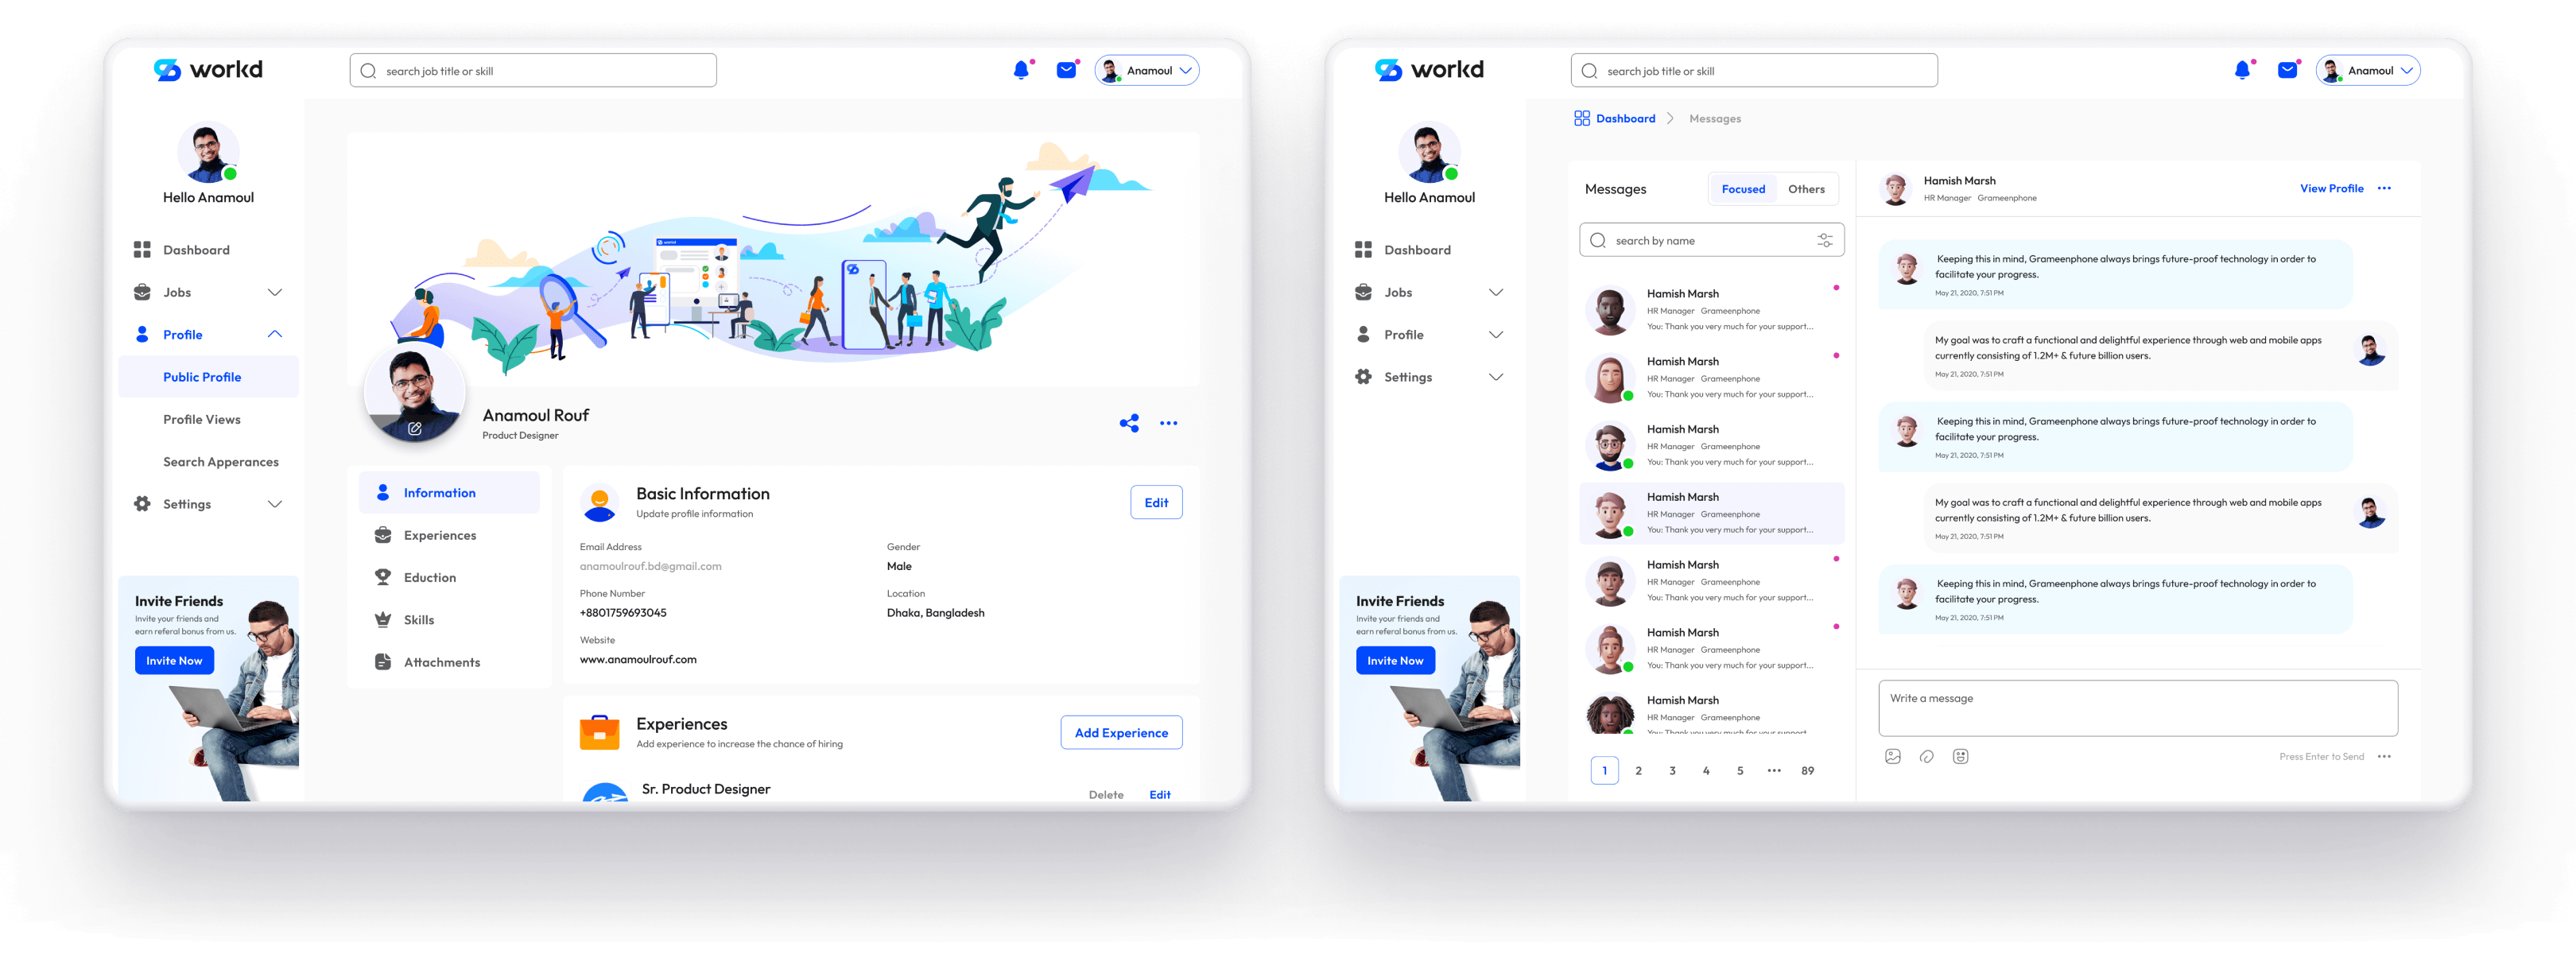 Workd Web App Case Study by Anamoul Rouf, Product Designer